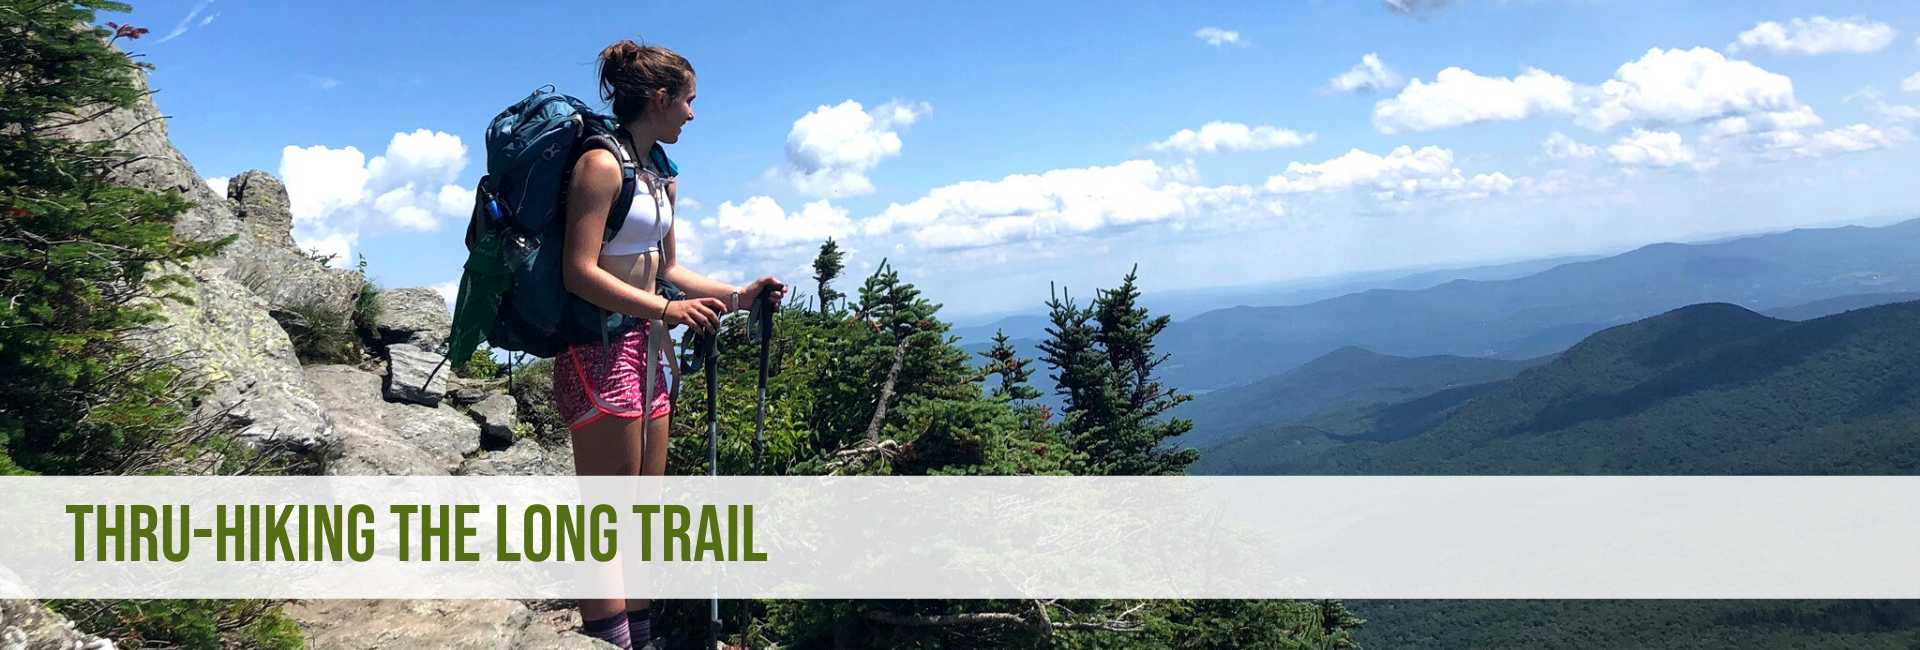 Jess Royer thruhikes across Camel's Hump. Photo by: Royer Family